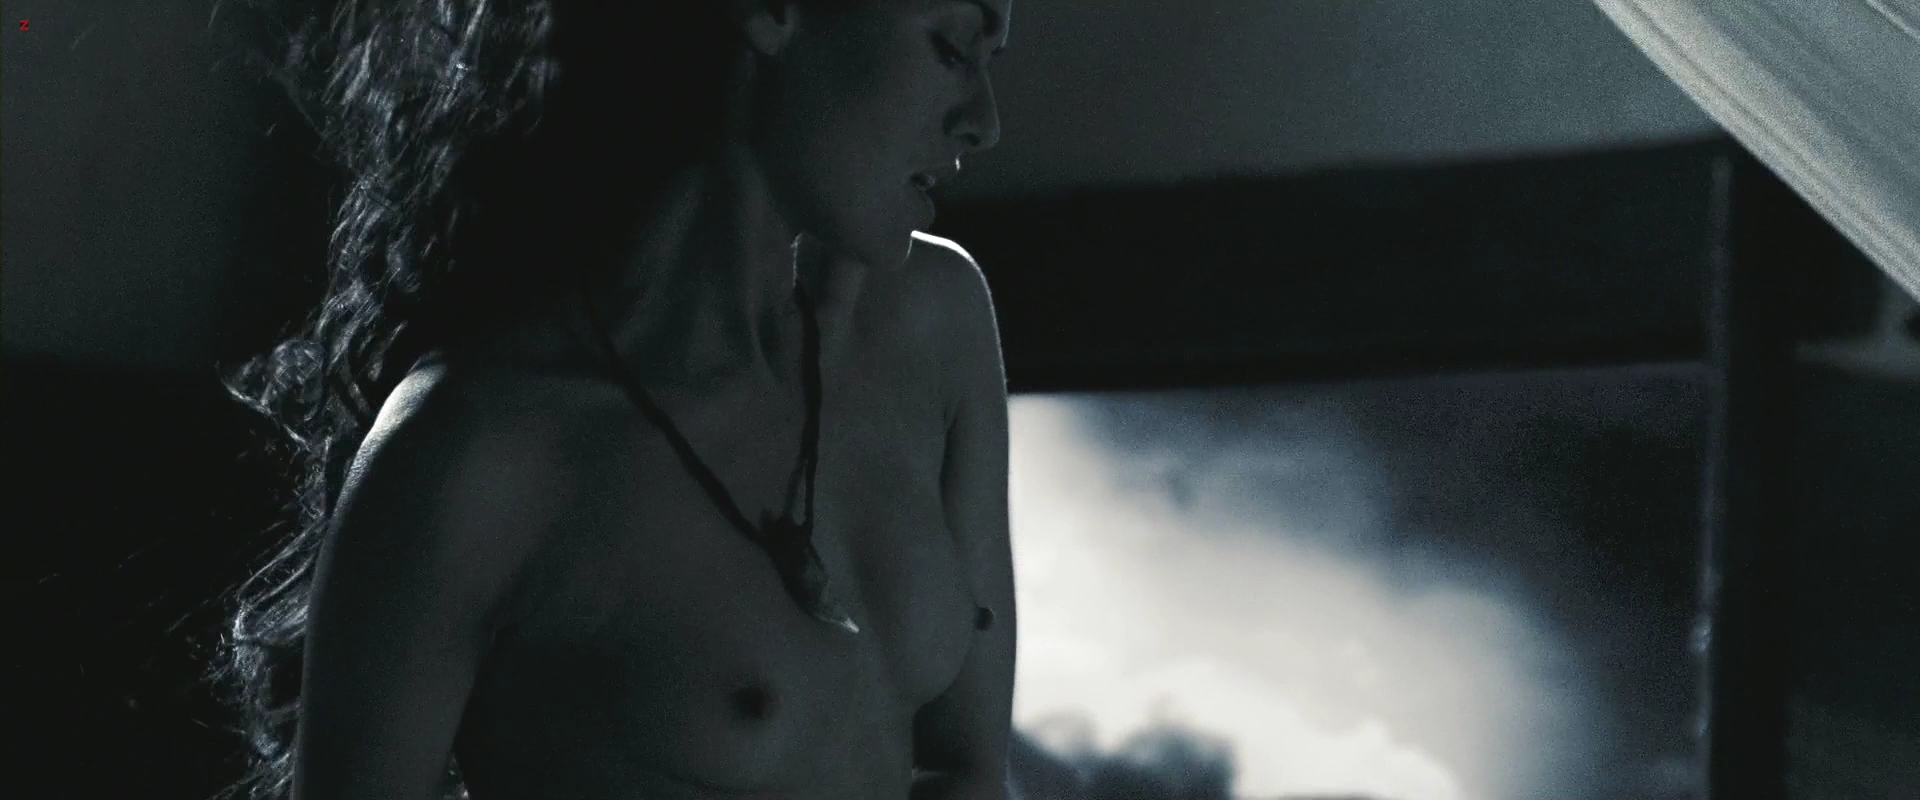 christopher duncan recommends Lena Headey Topless 300